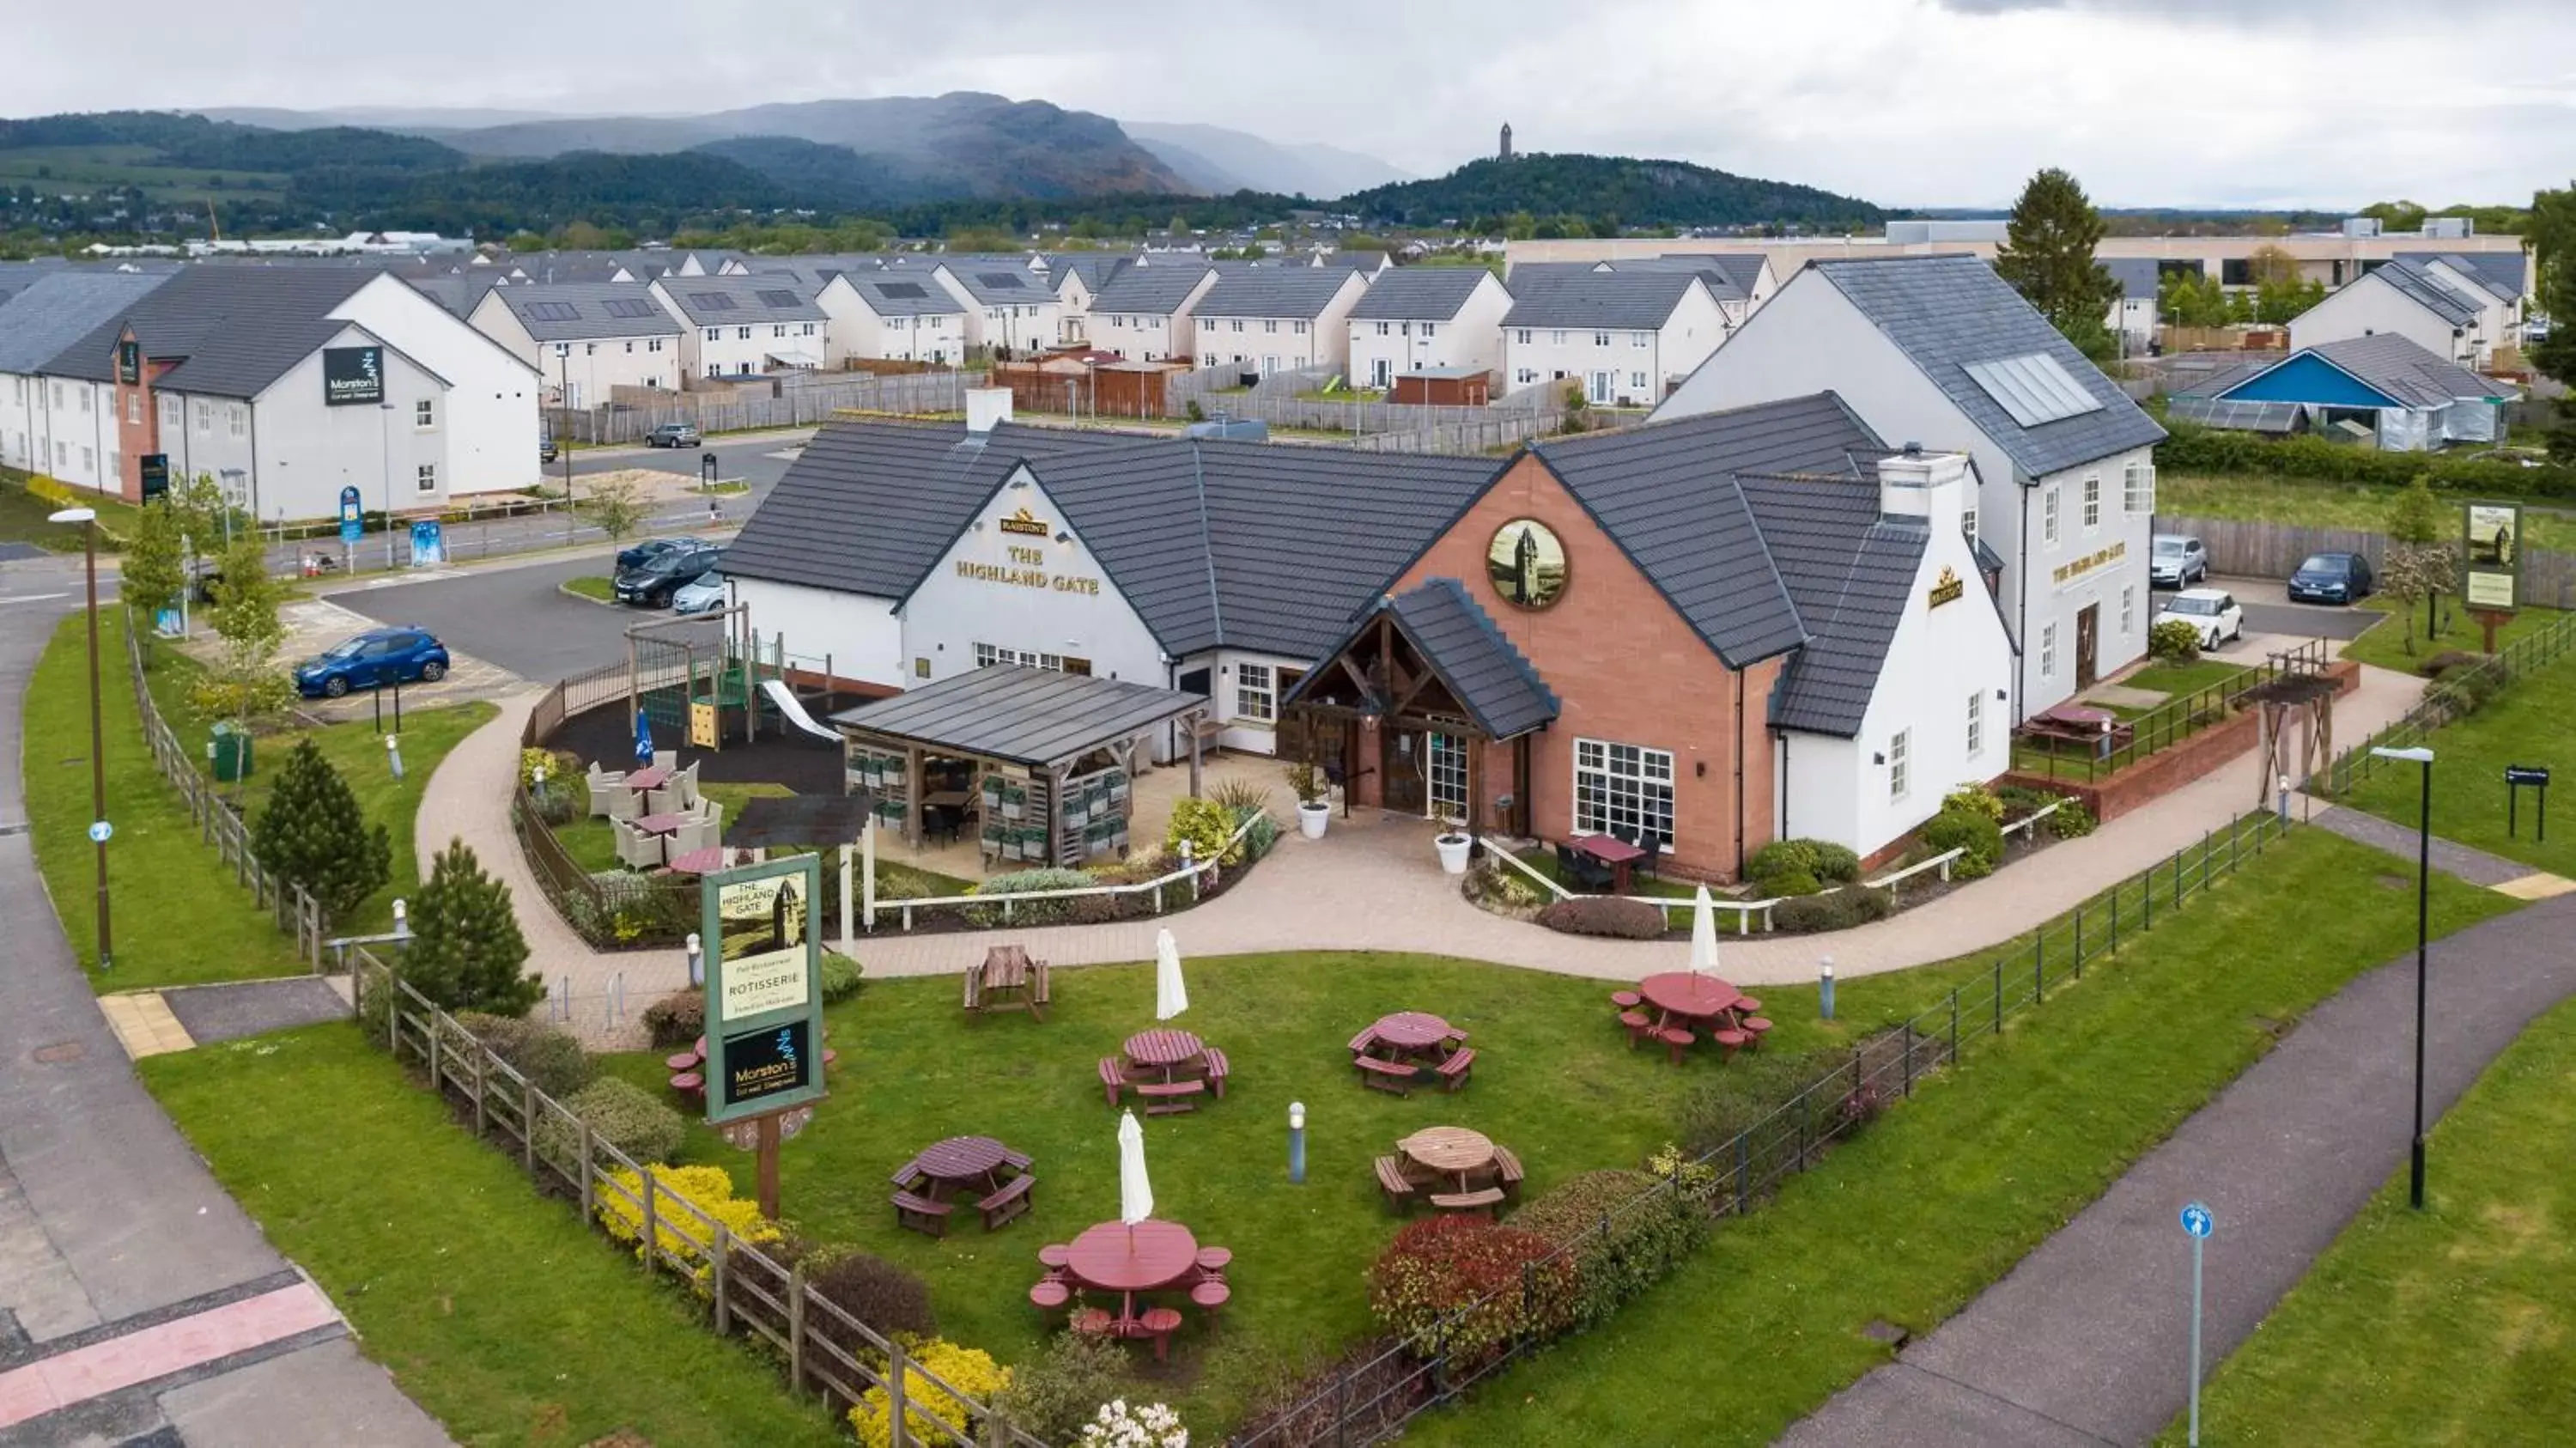 Property building, Bird's-eye View in Highland Gate, Stirling by Marston's Inns